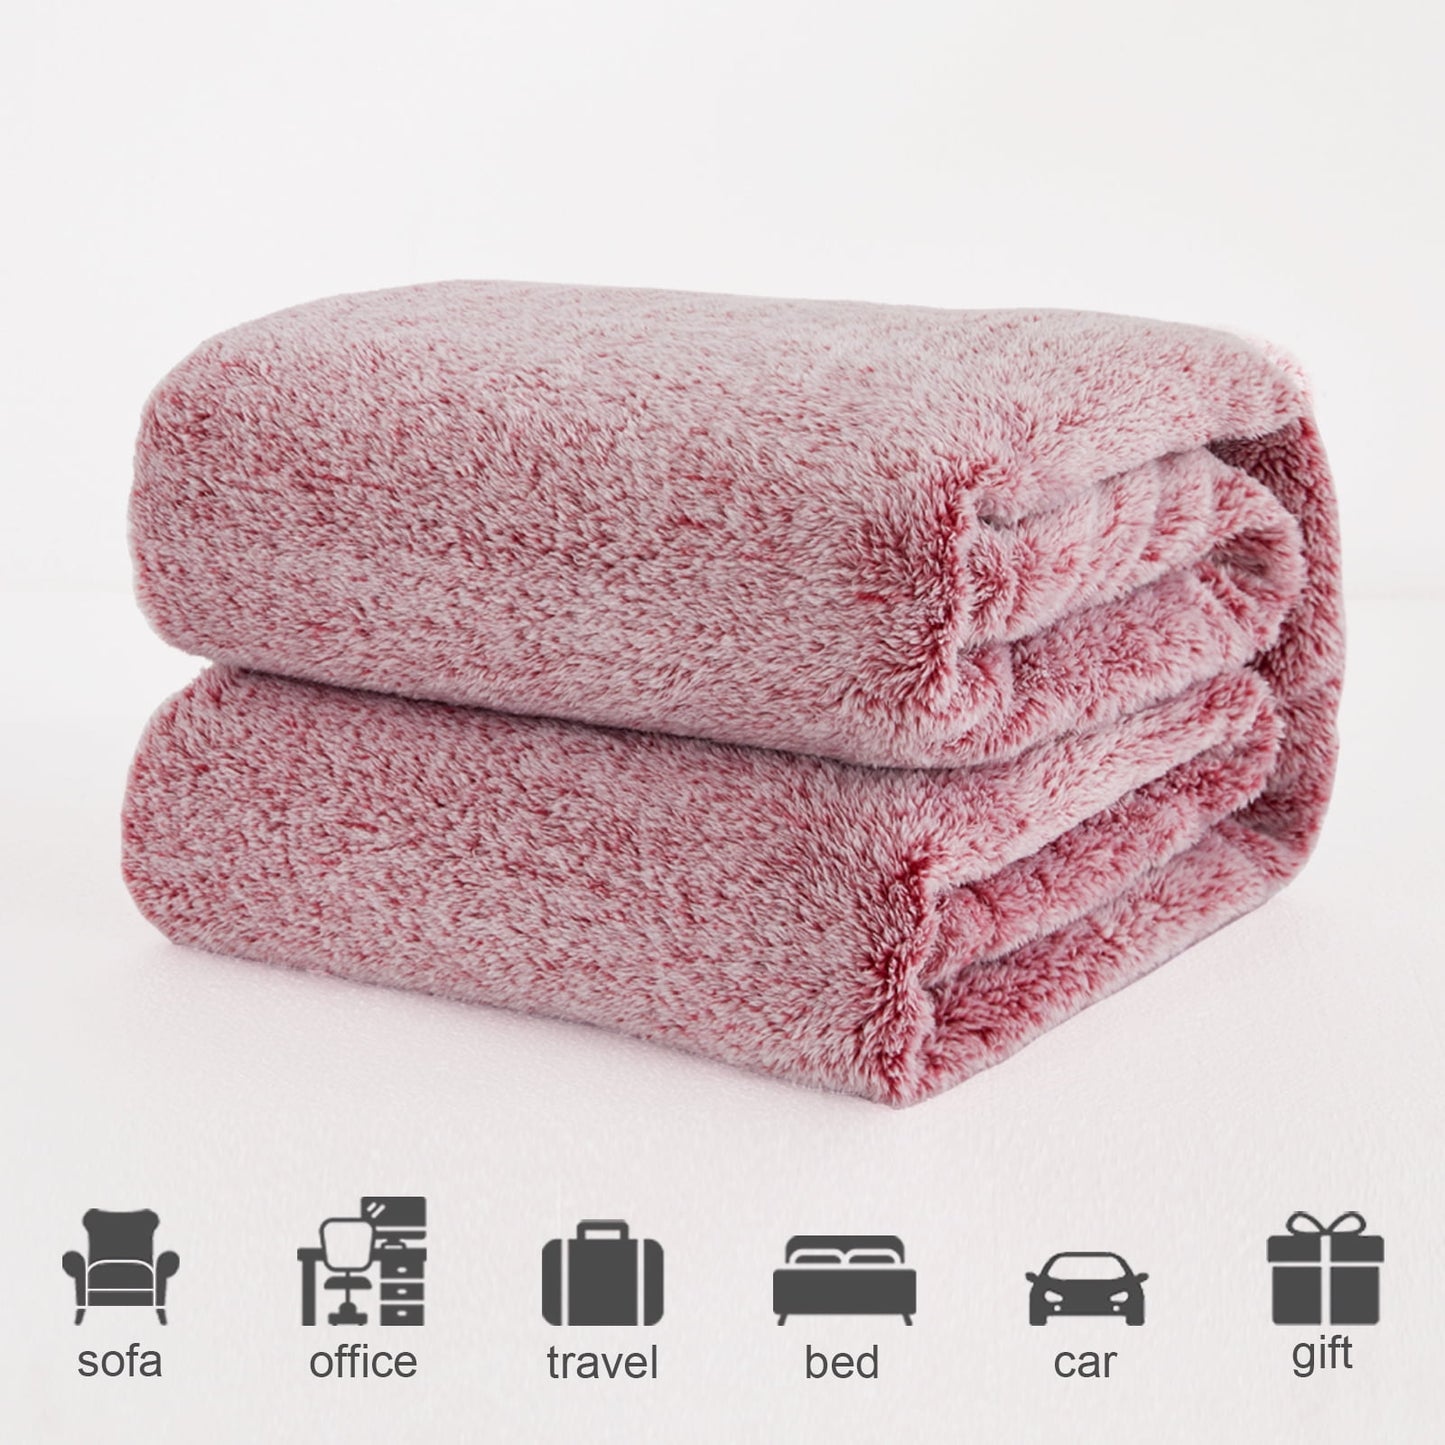 Exclusivo Mezcla Plush Fuzzy Fleece King Size Bed Blanket, Super Soft Fluffy and Thick Blankets for Travel Bed and Couch (Mixed Deep Red, 90x104 inches)